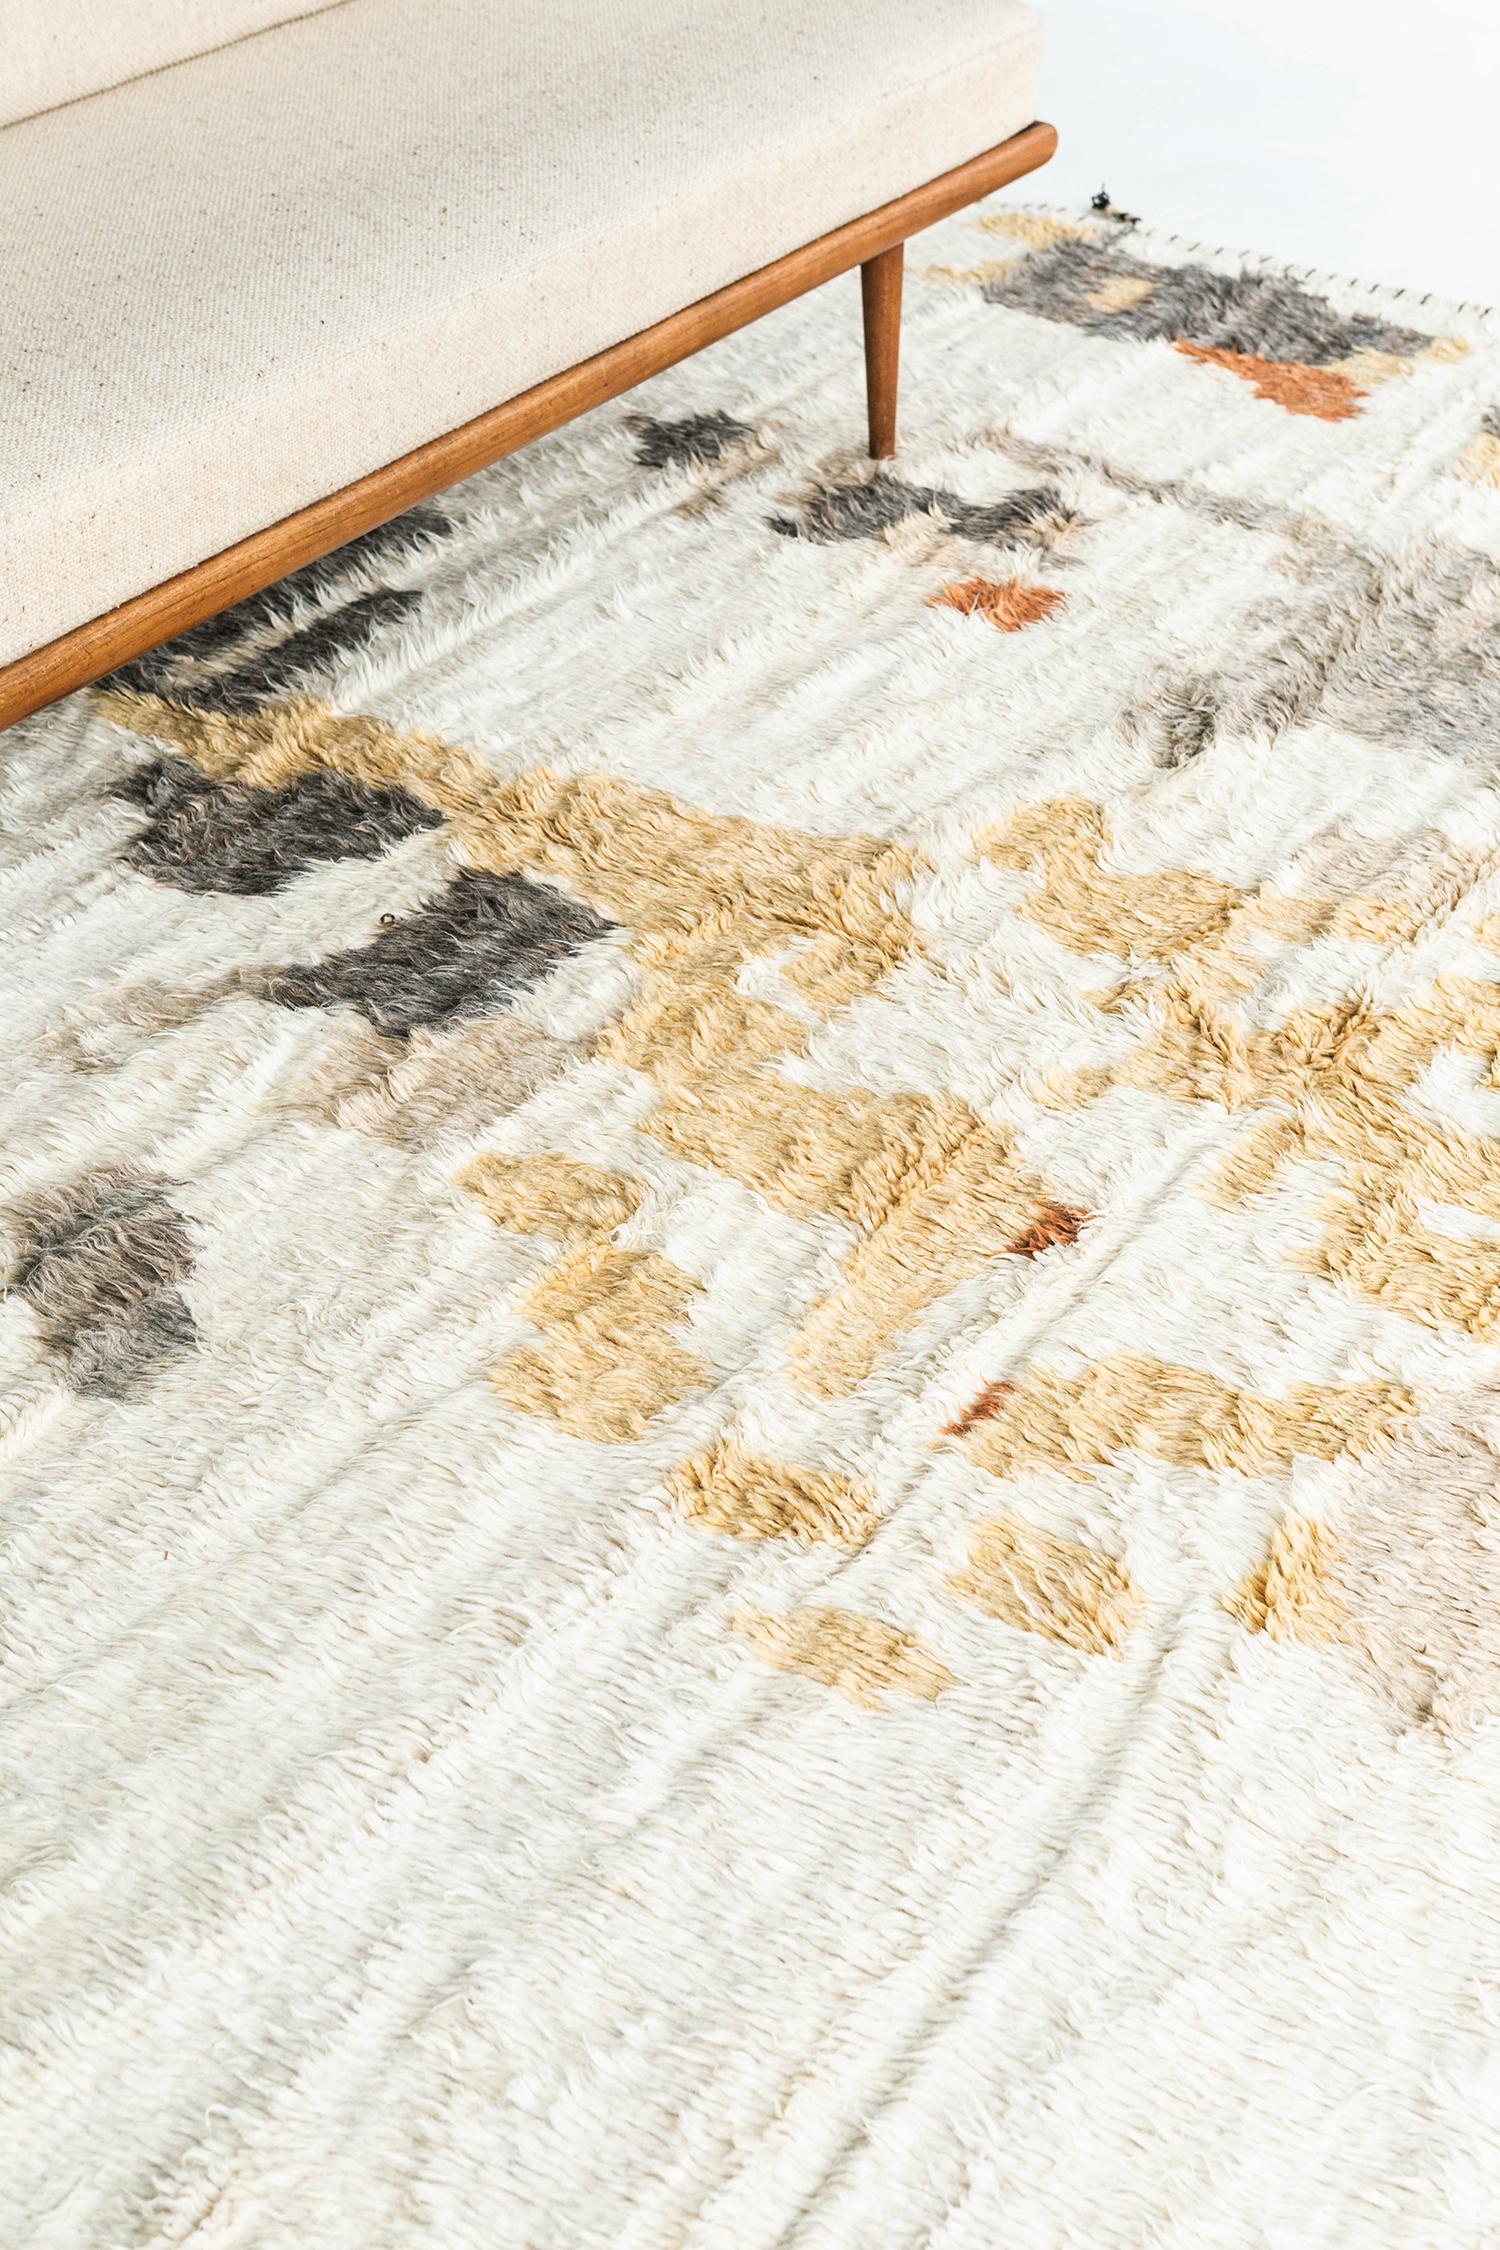 Zazate' is made of luxurious wool and is made of timeless design elements. Its weaving of natural earth tones with golden yellow and unique design elements is what makes the Atlas Collection so unique and sought after. Mehraban's Atlas collection is